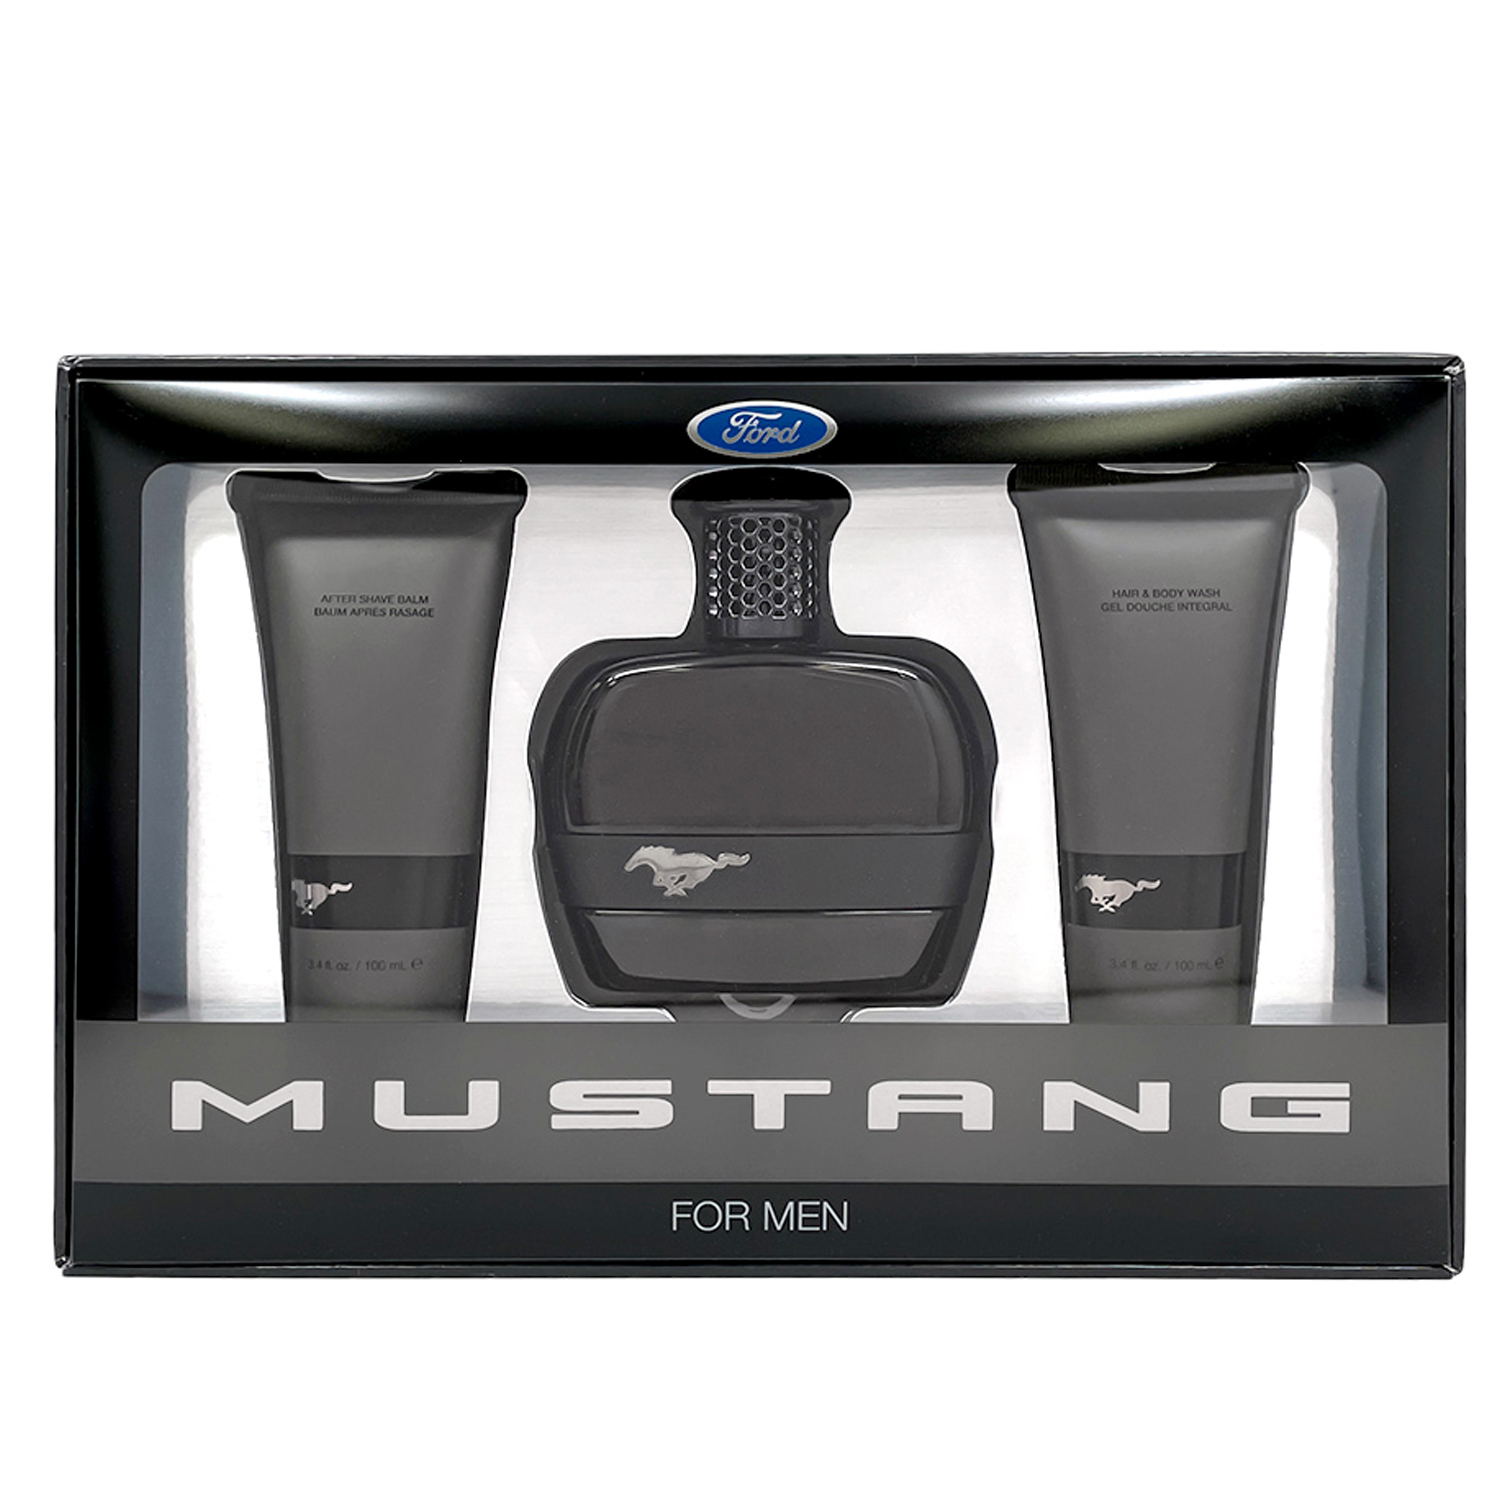 Mustang - Oz Body 3.4 Oz Black Oz After / Set Bridge Edt/3.4 and Shave Balm - 3.4 Beauty Hair Wash